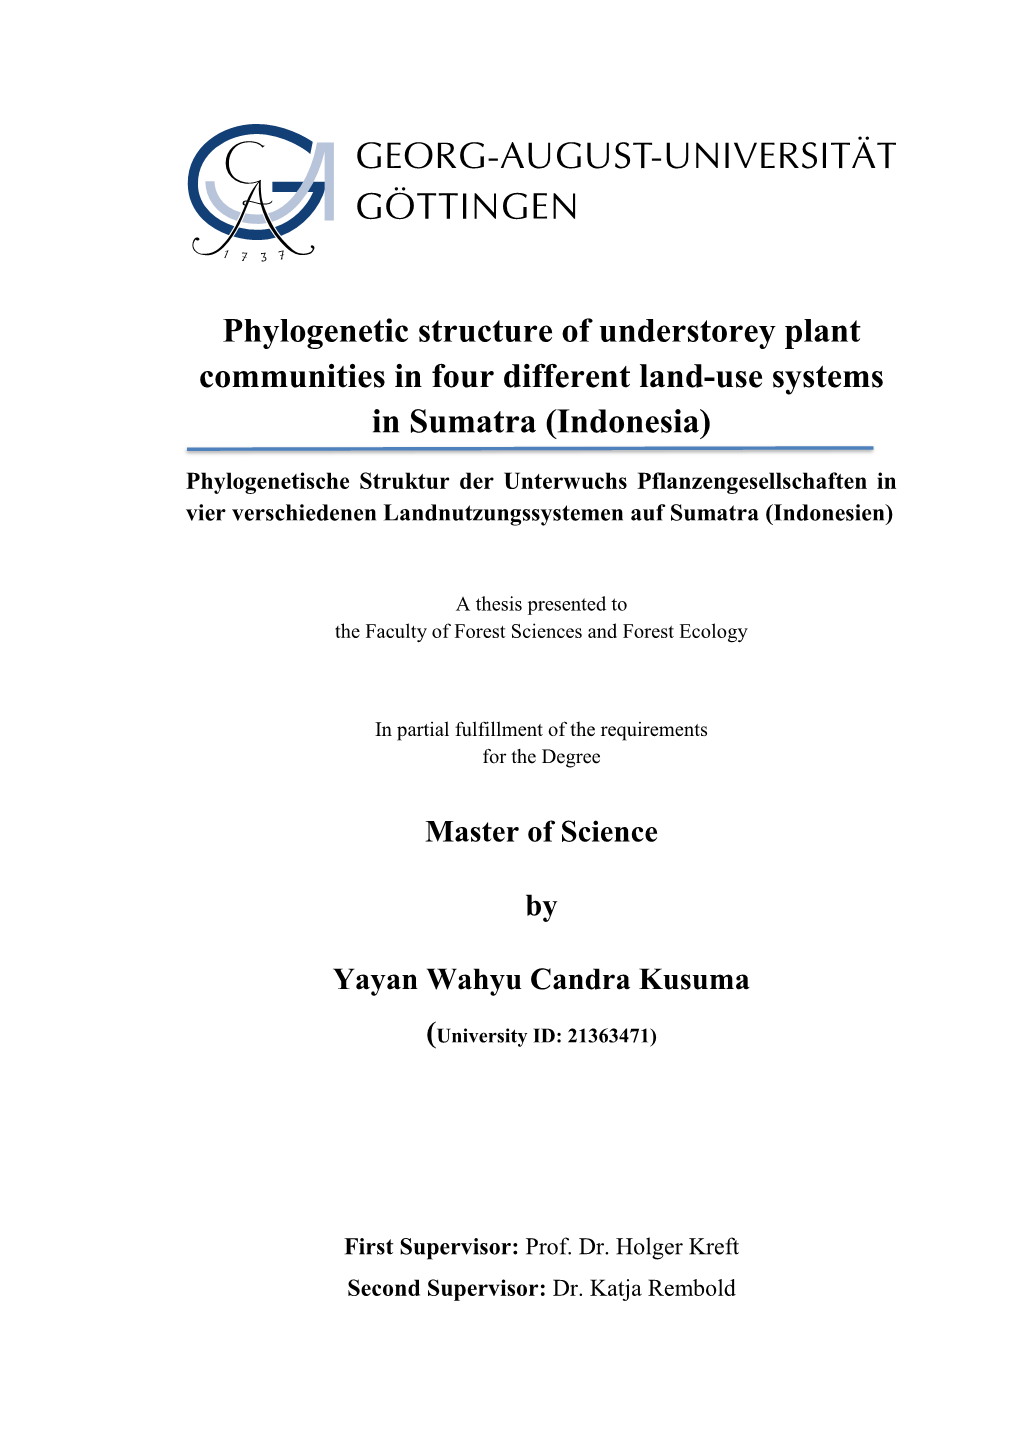 Phylogenetic Structure of Understorey Plant Communities in Four Different Land-Use Systems in Sumatra (Indonesia)